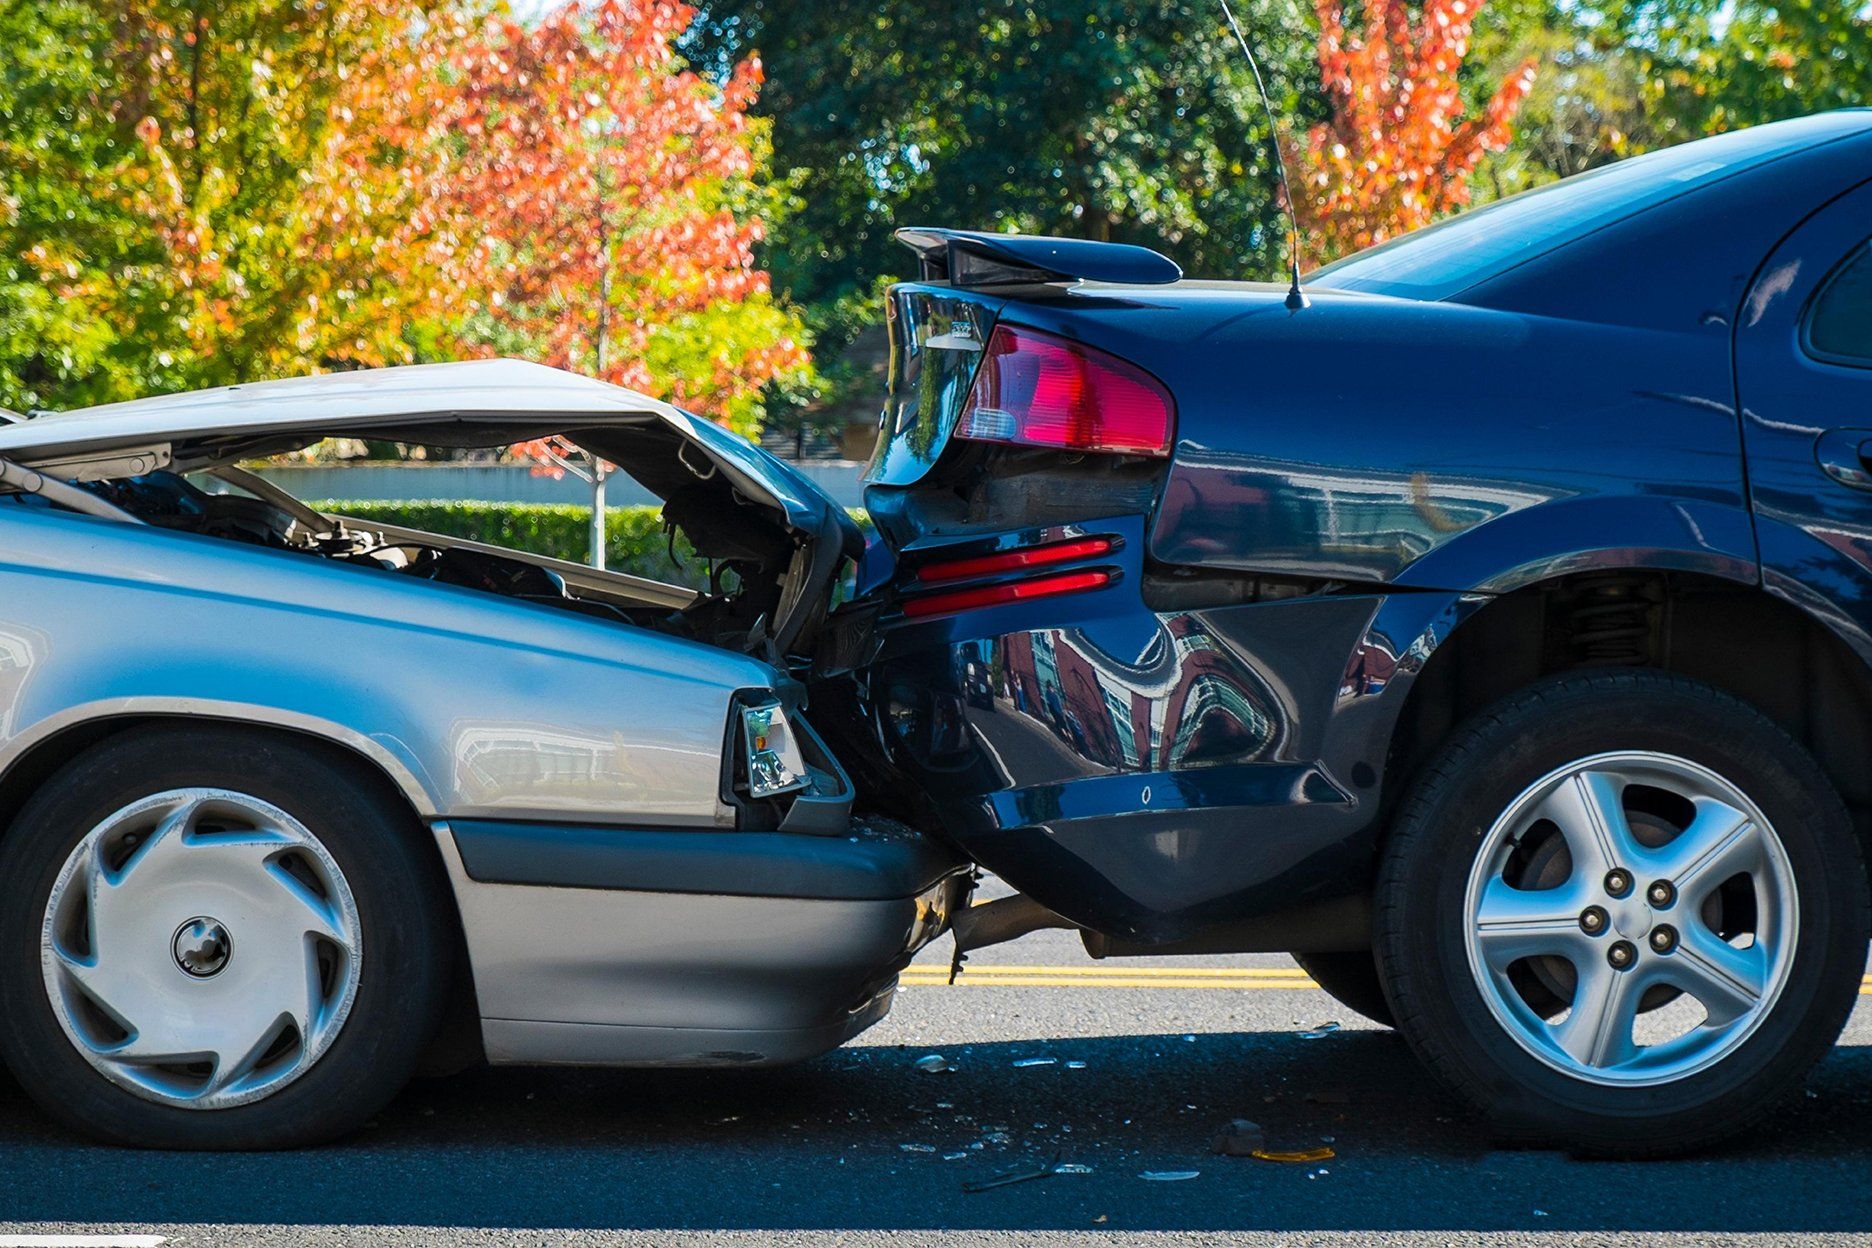 Common Causes of Auto Accidents